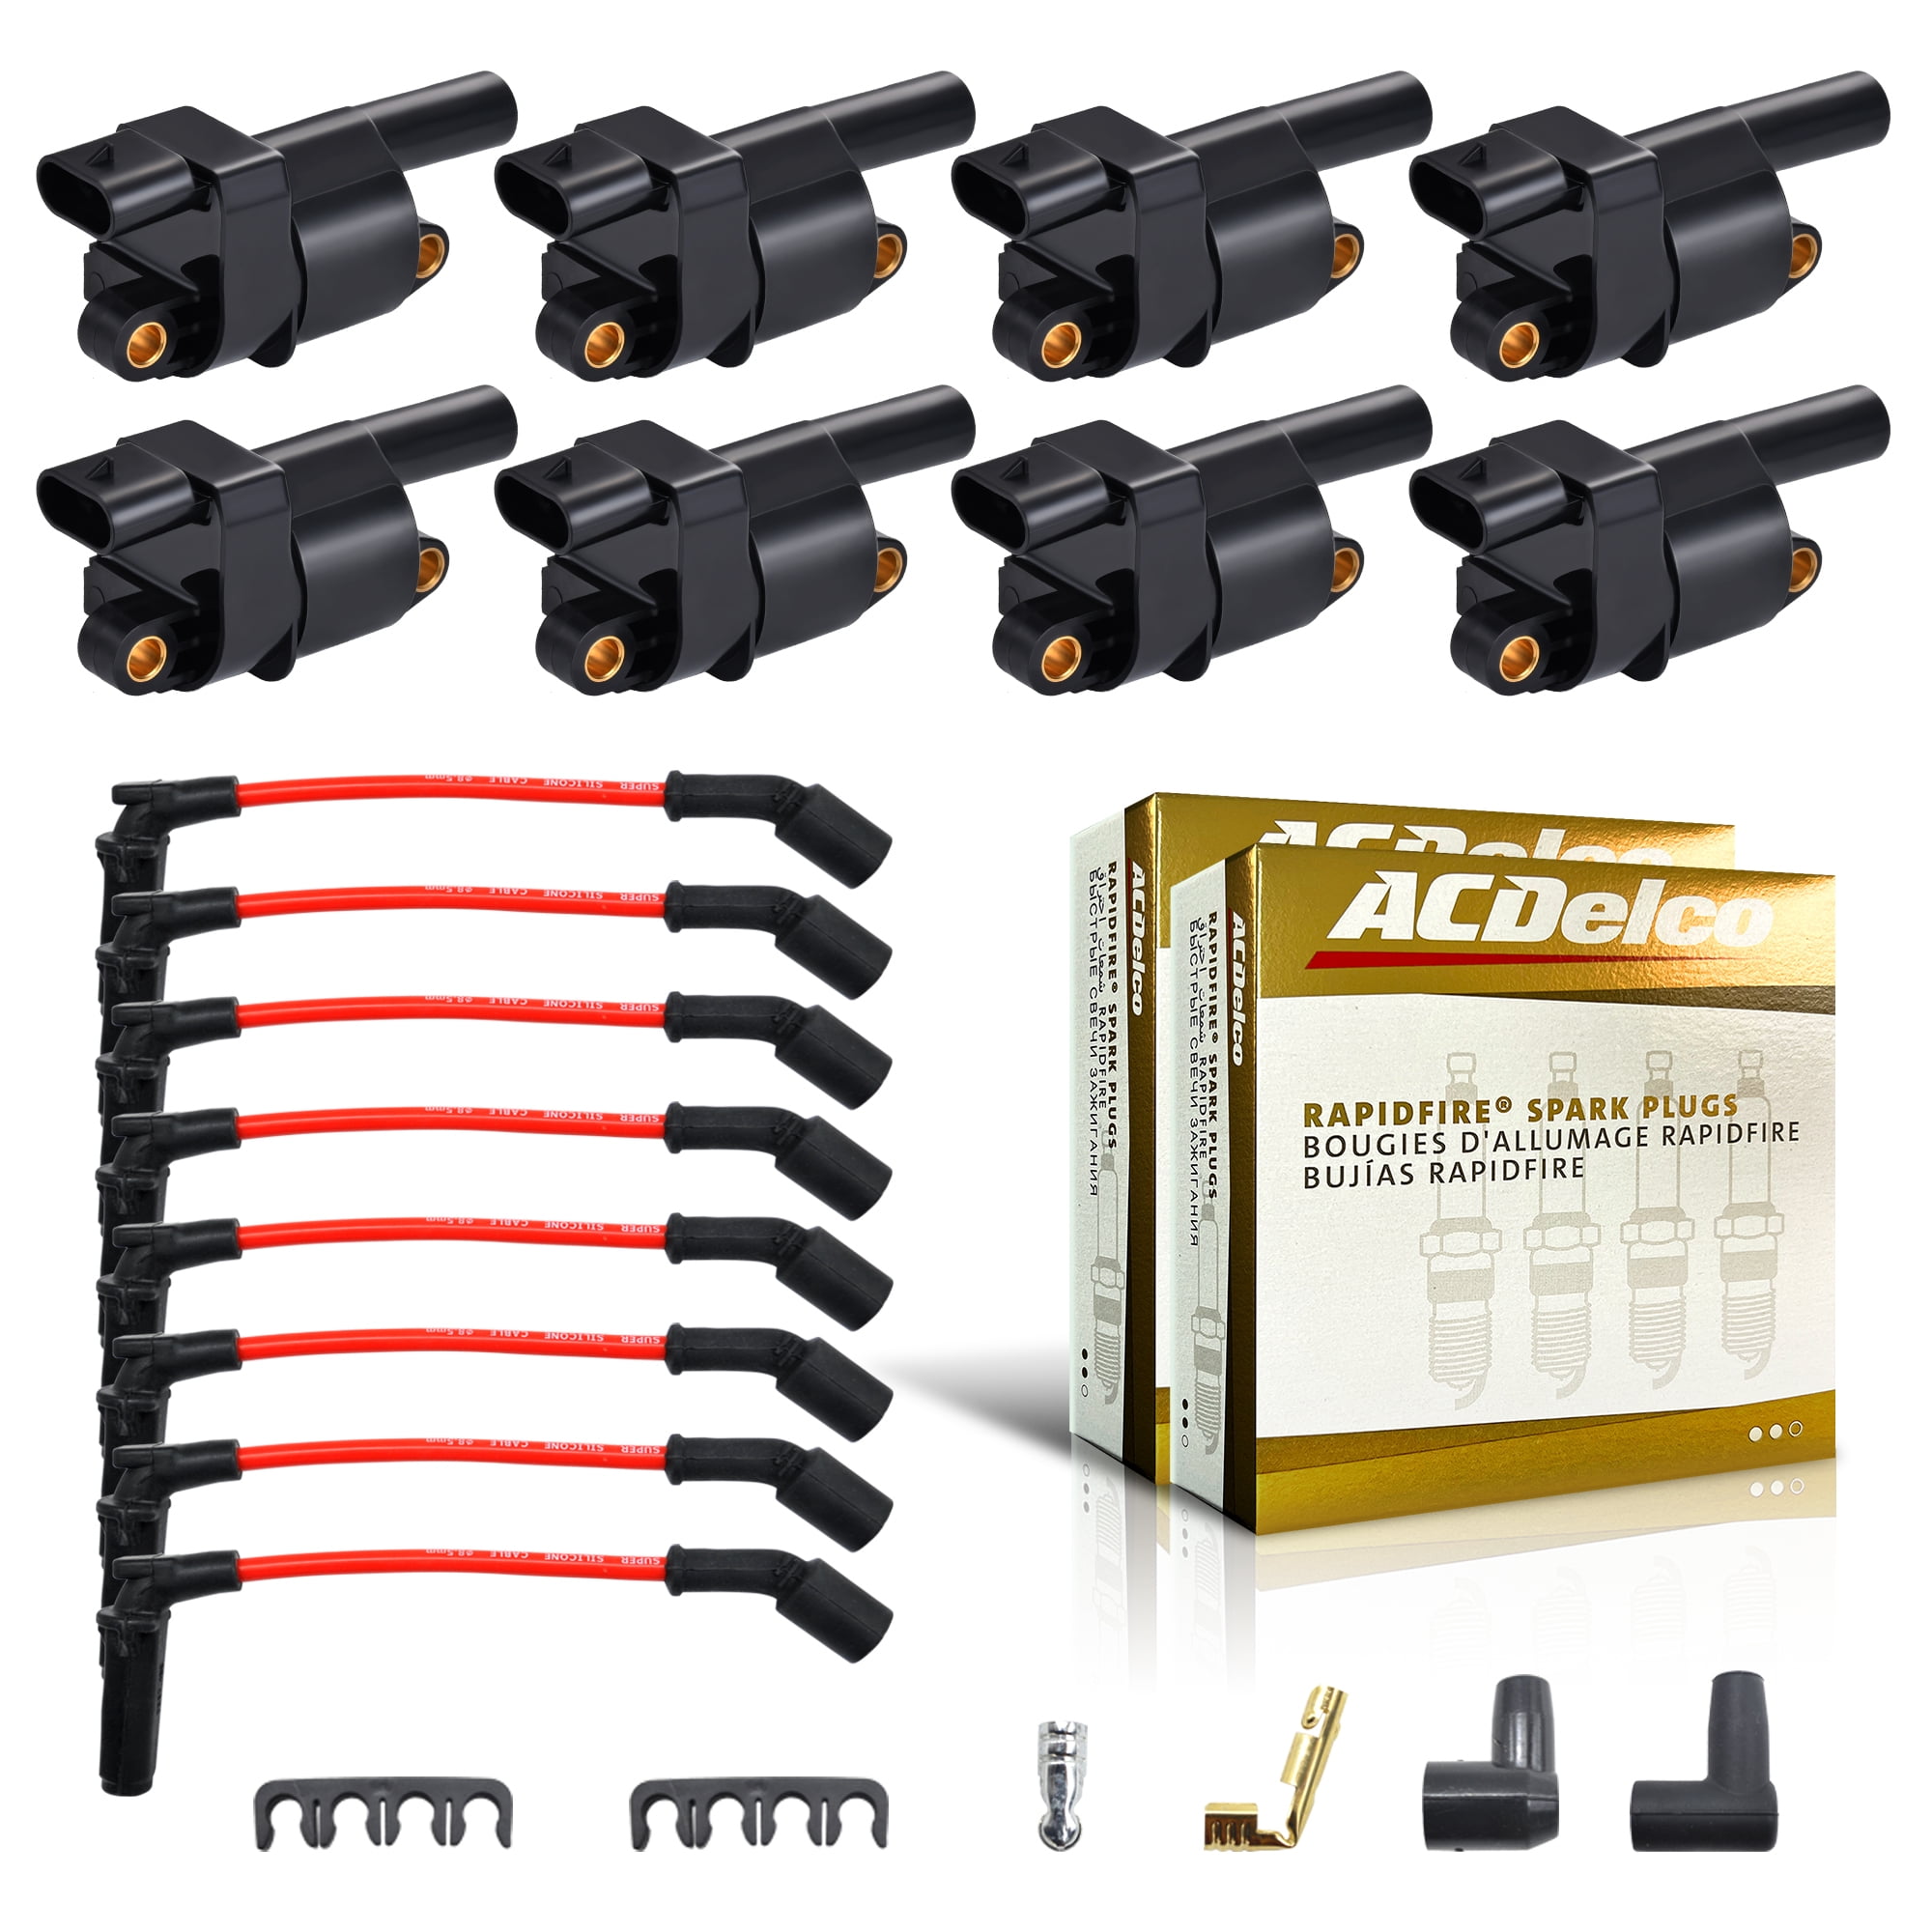 8 Pcs of UF414 Ignition Coil Packs & ACDelco Spark Plug & Spark